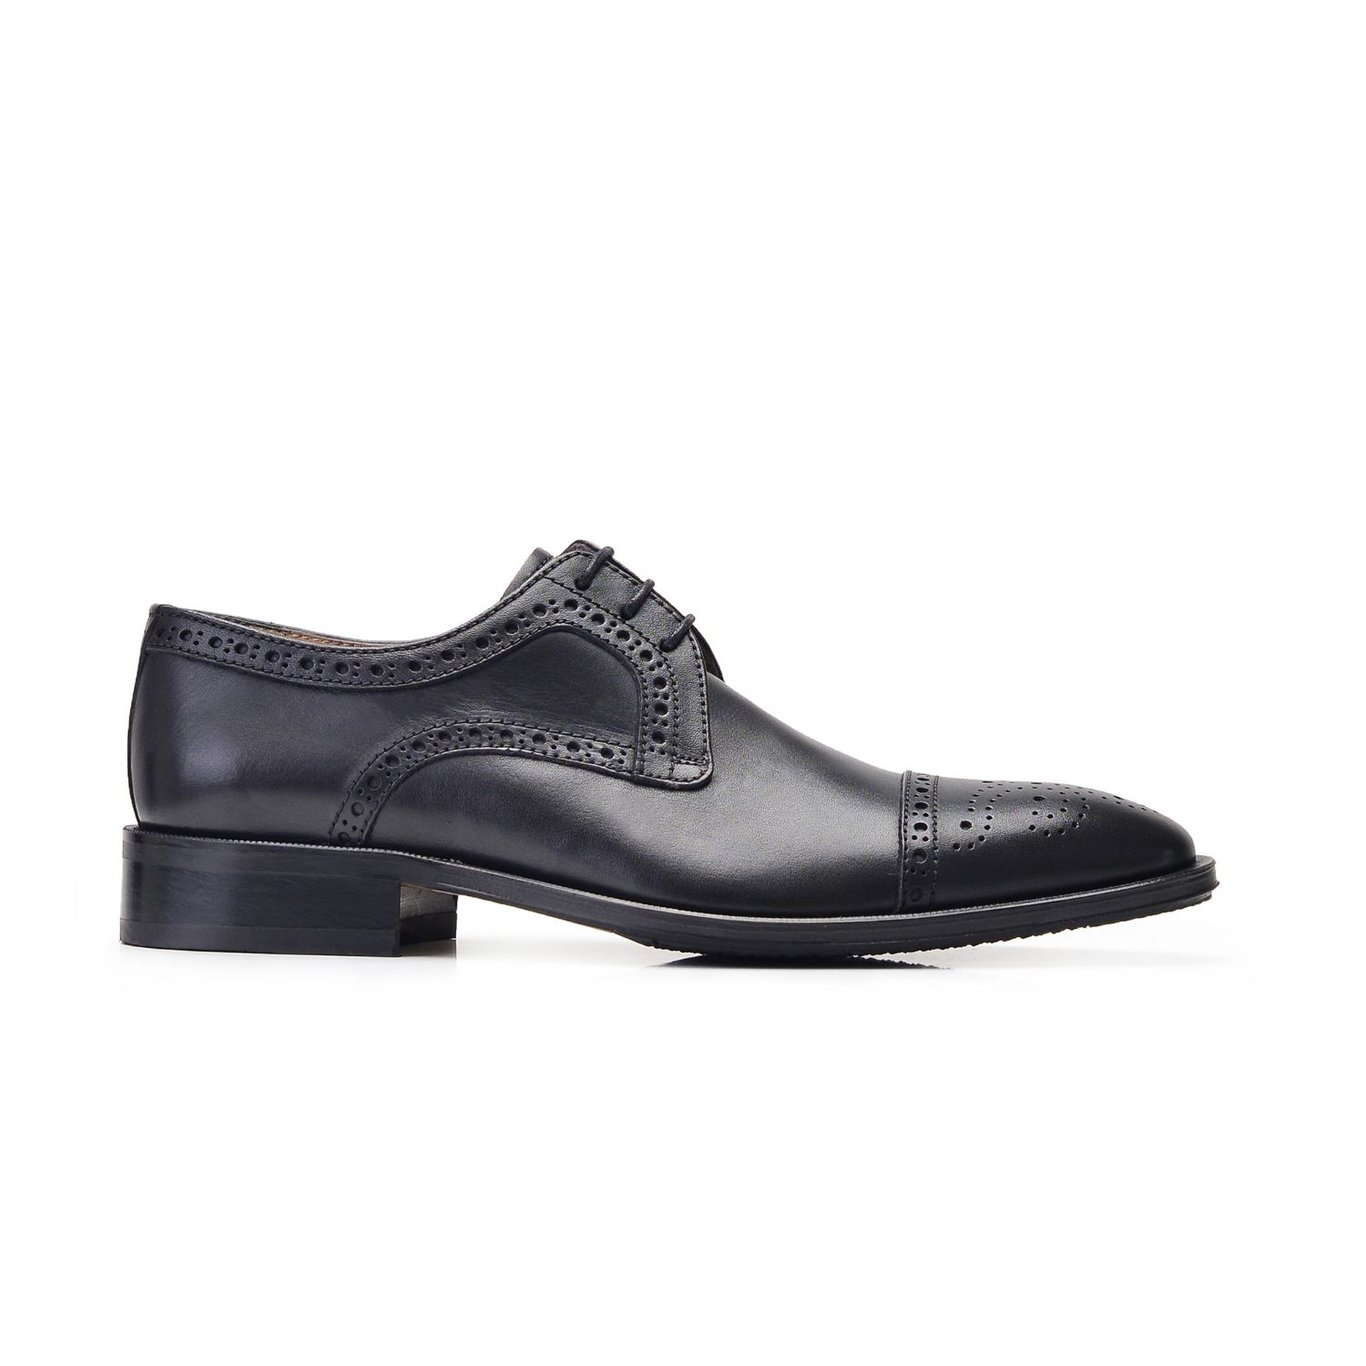 Nevzat Onay Genuine Leather Black Men Classical Shoes -11867-